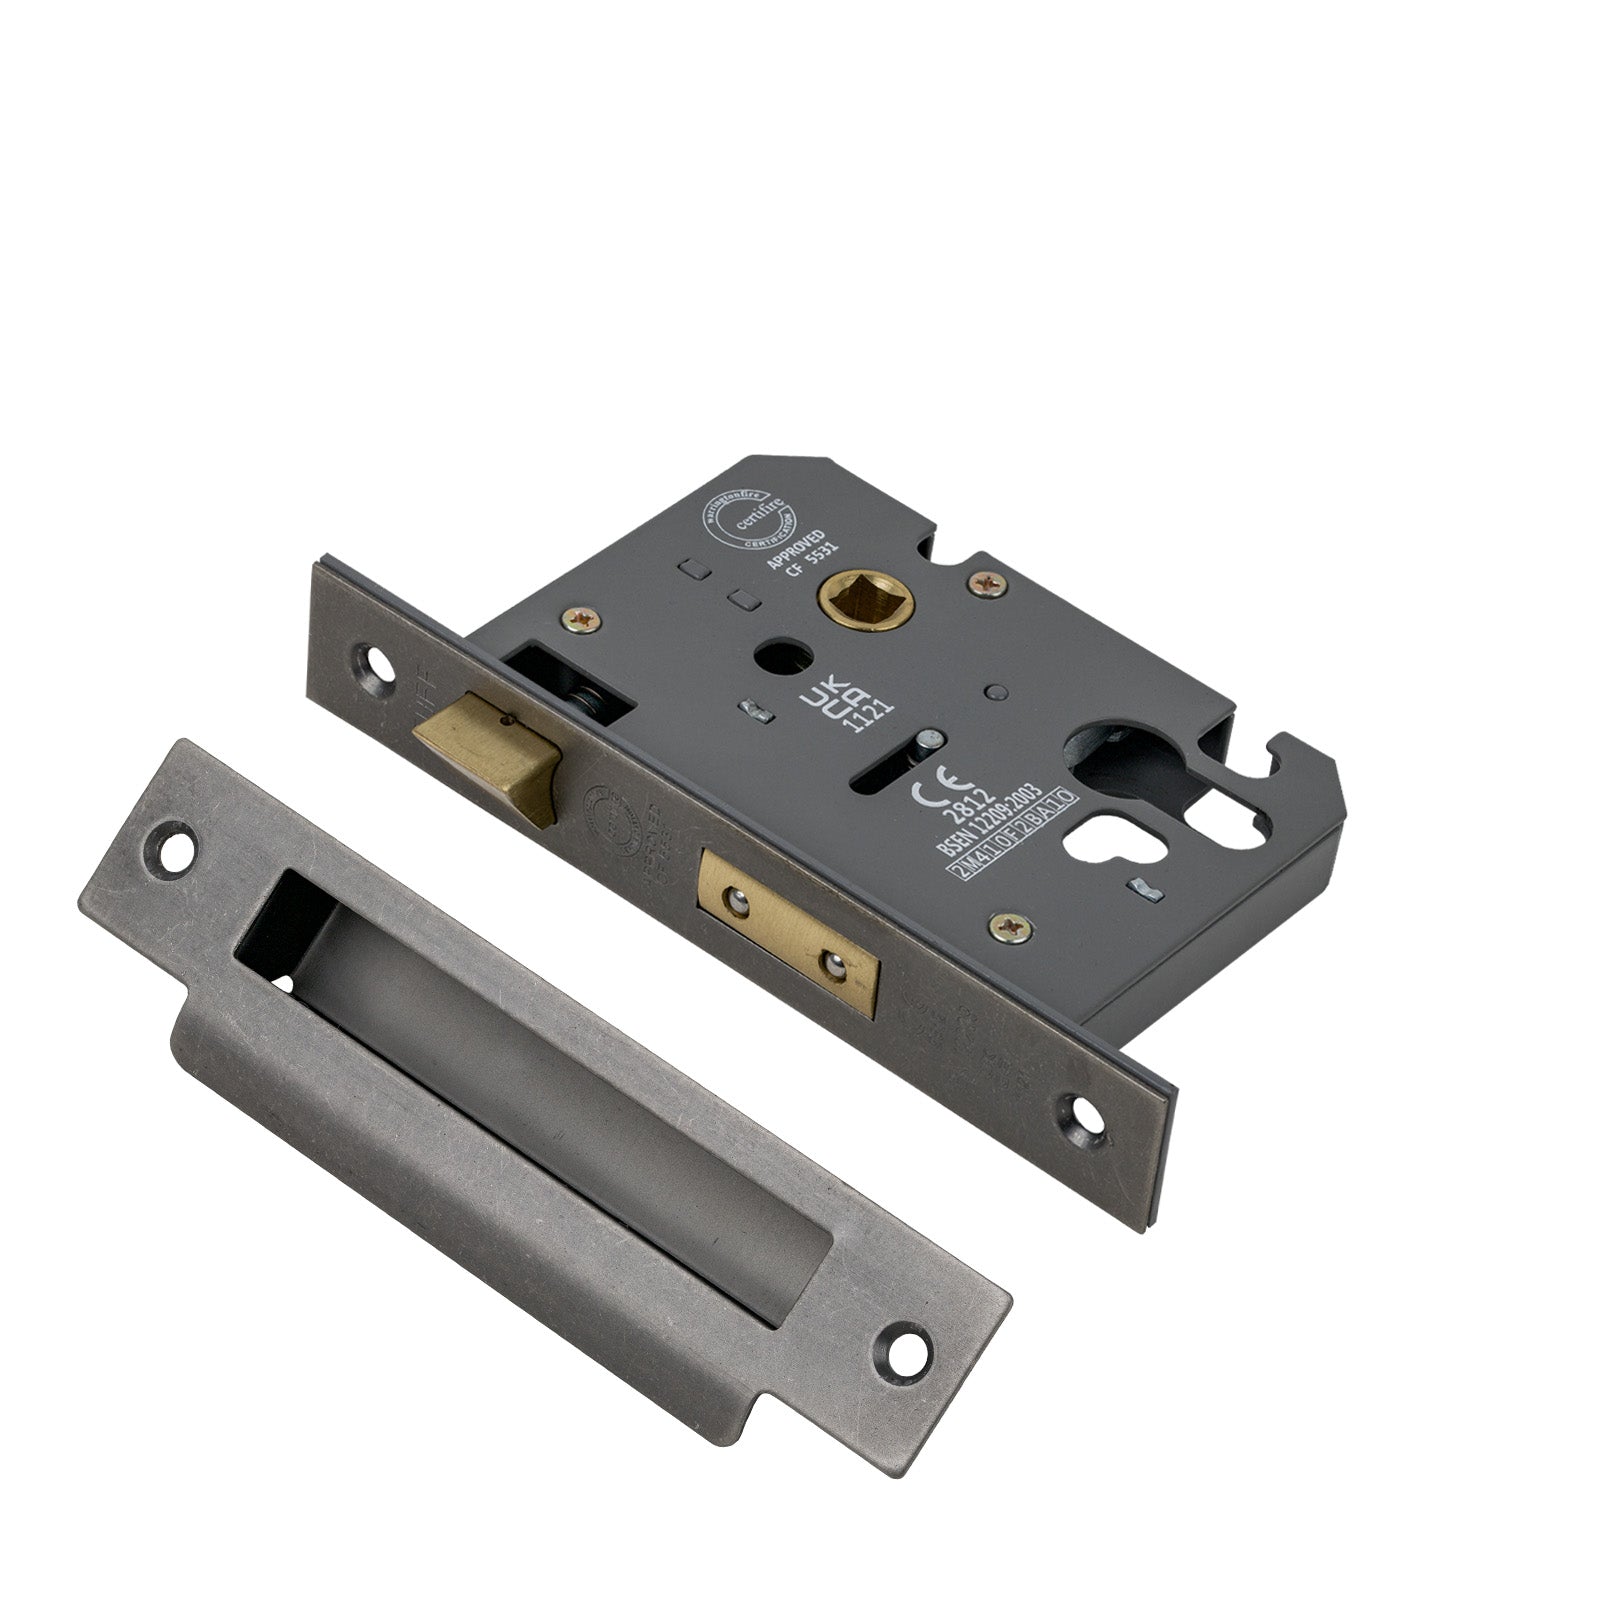 SHOW 3 Lever Euro Sash Lock - 3 Inch with Distressed Silver finished forend and striker plate